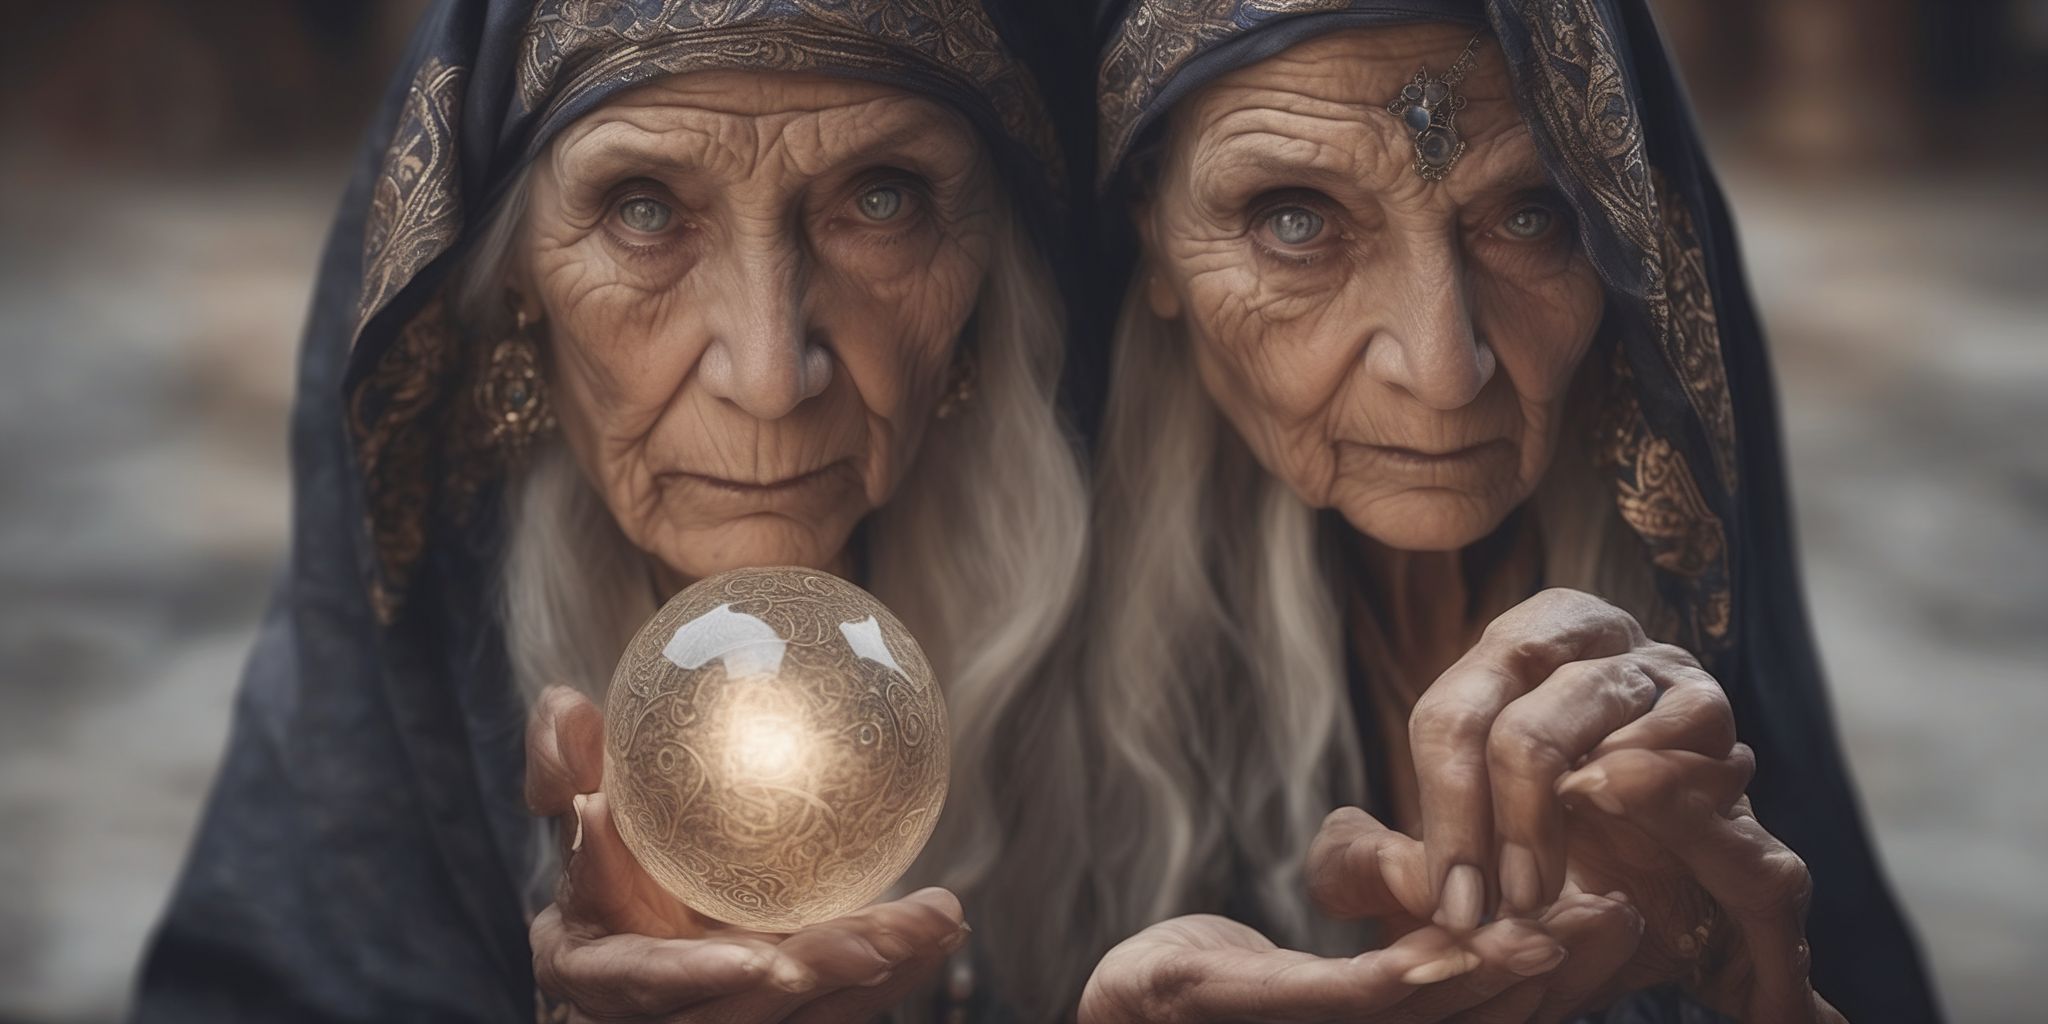 Fortune teller  in realistic, photographic style